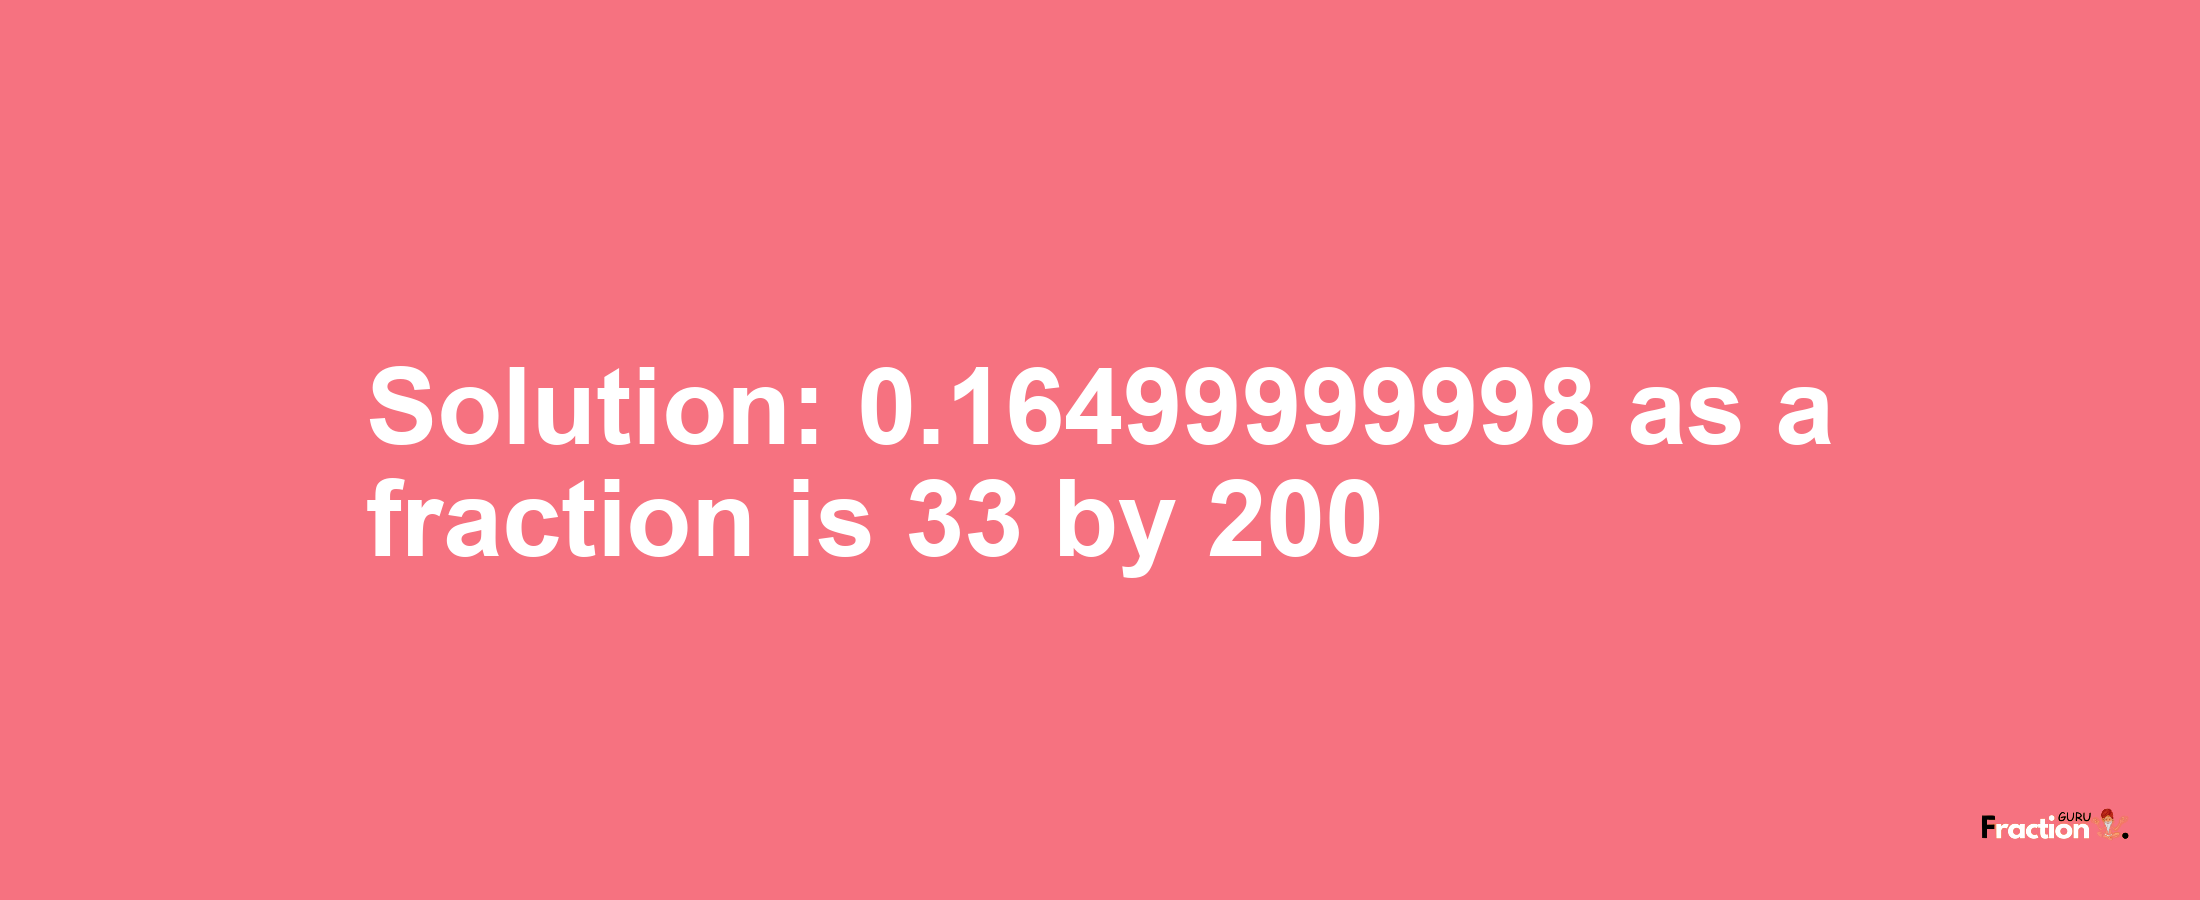 Solution:0.16499999998 as a fraction is 33/200